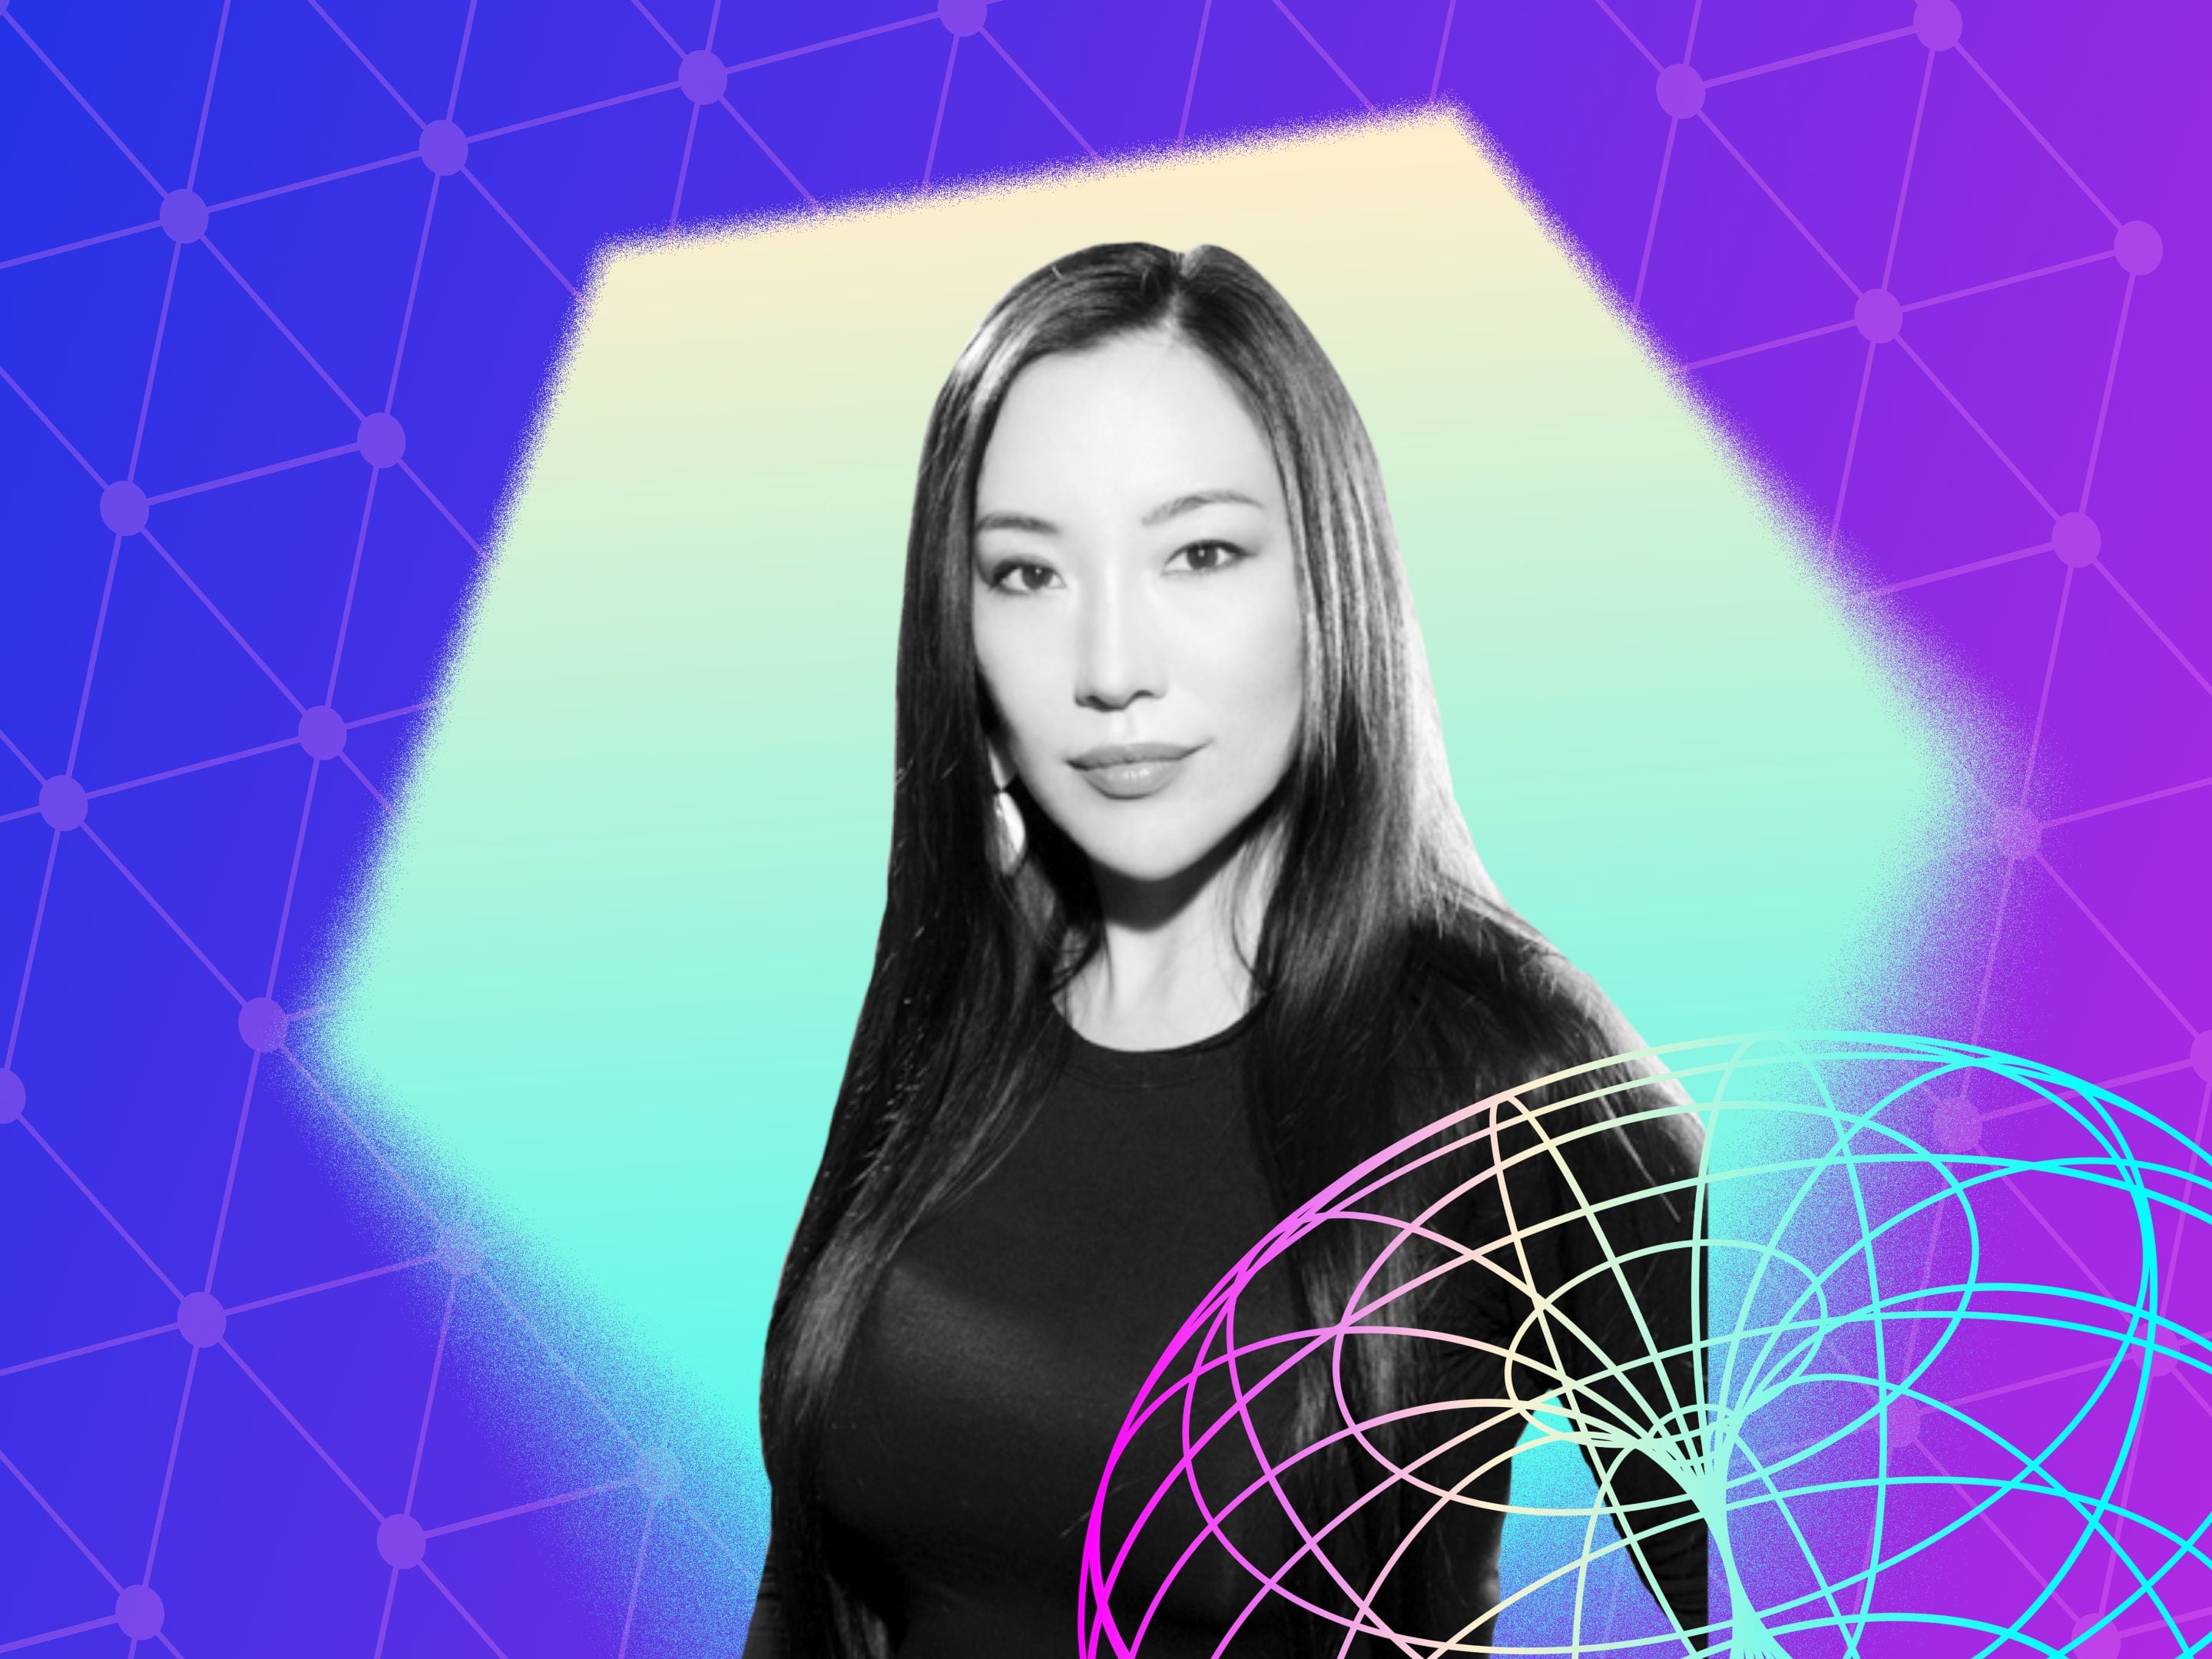 (Krista Kim, modified by CoinDesk)